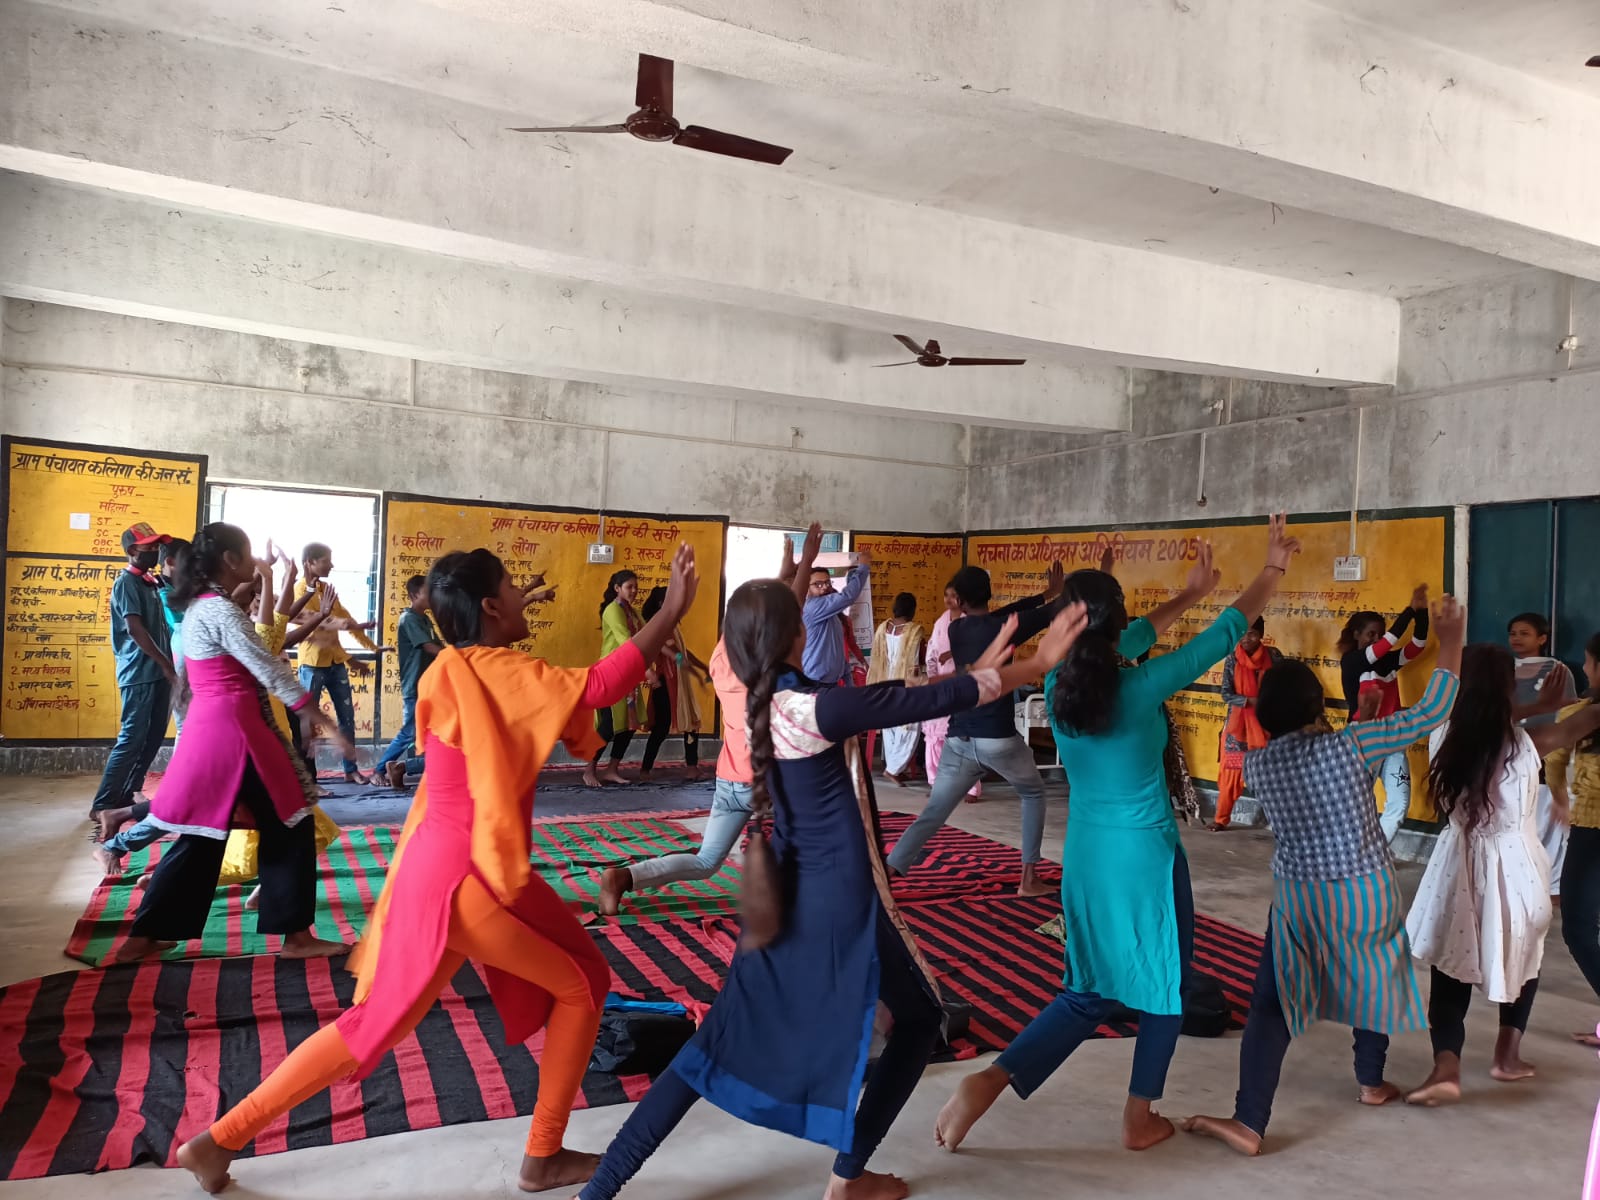 Group of women seen dancing with their hands up in a room. They are wearing colourful garments.